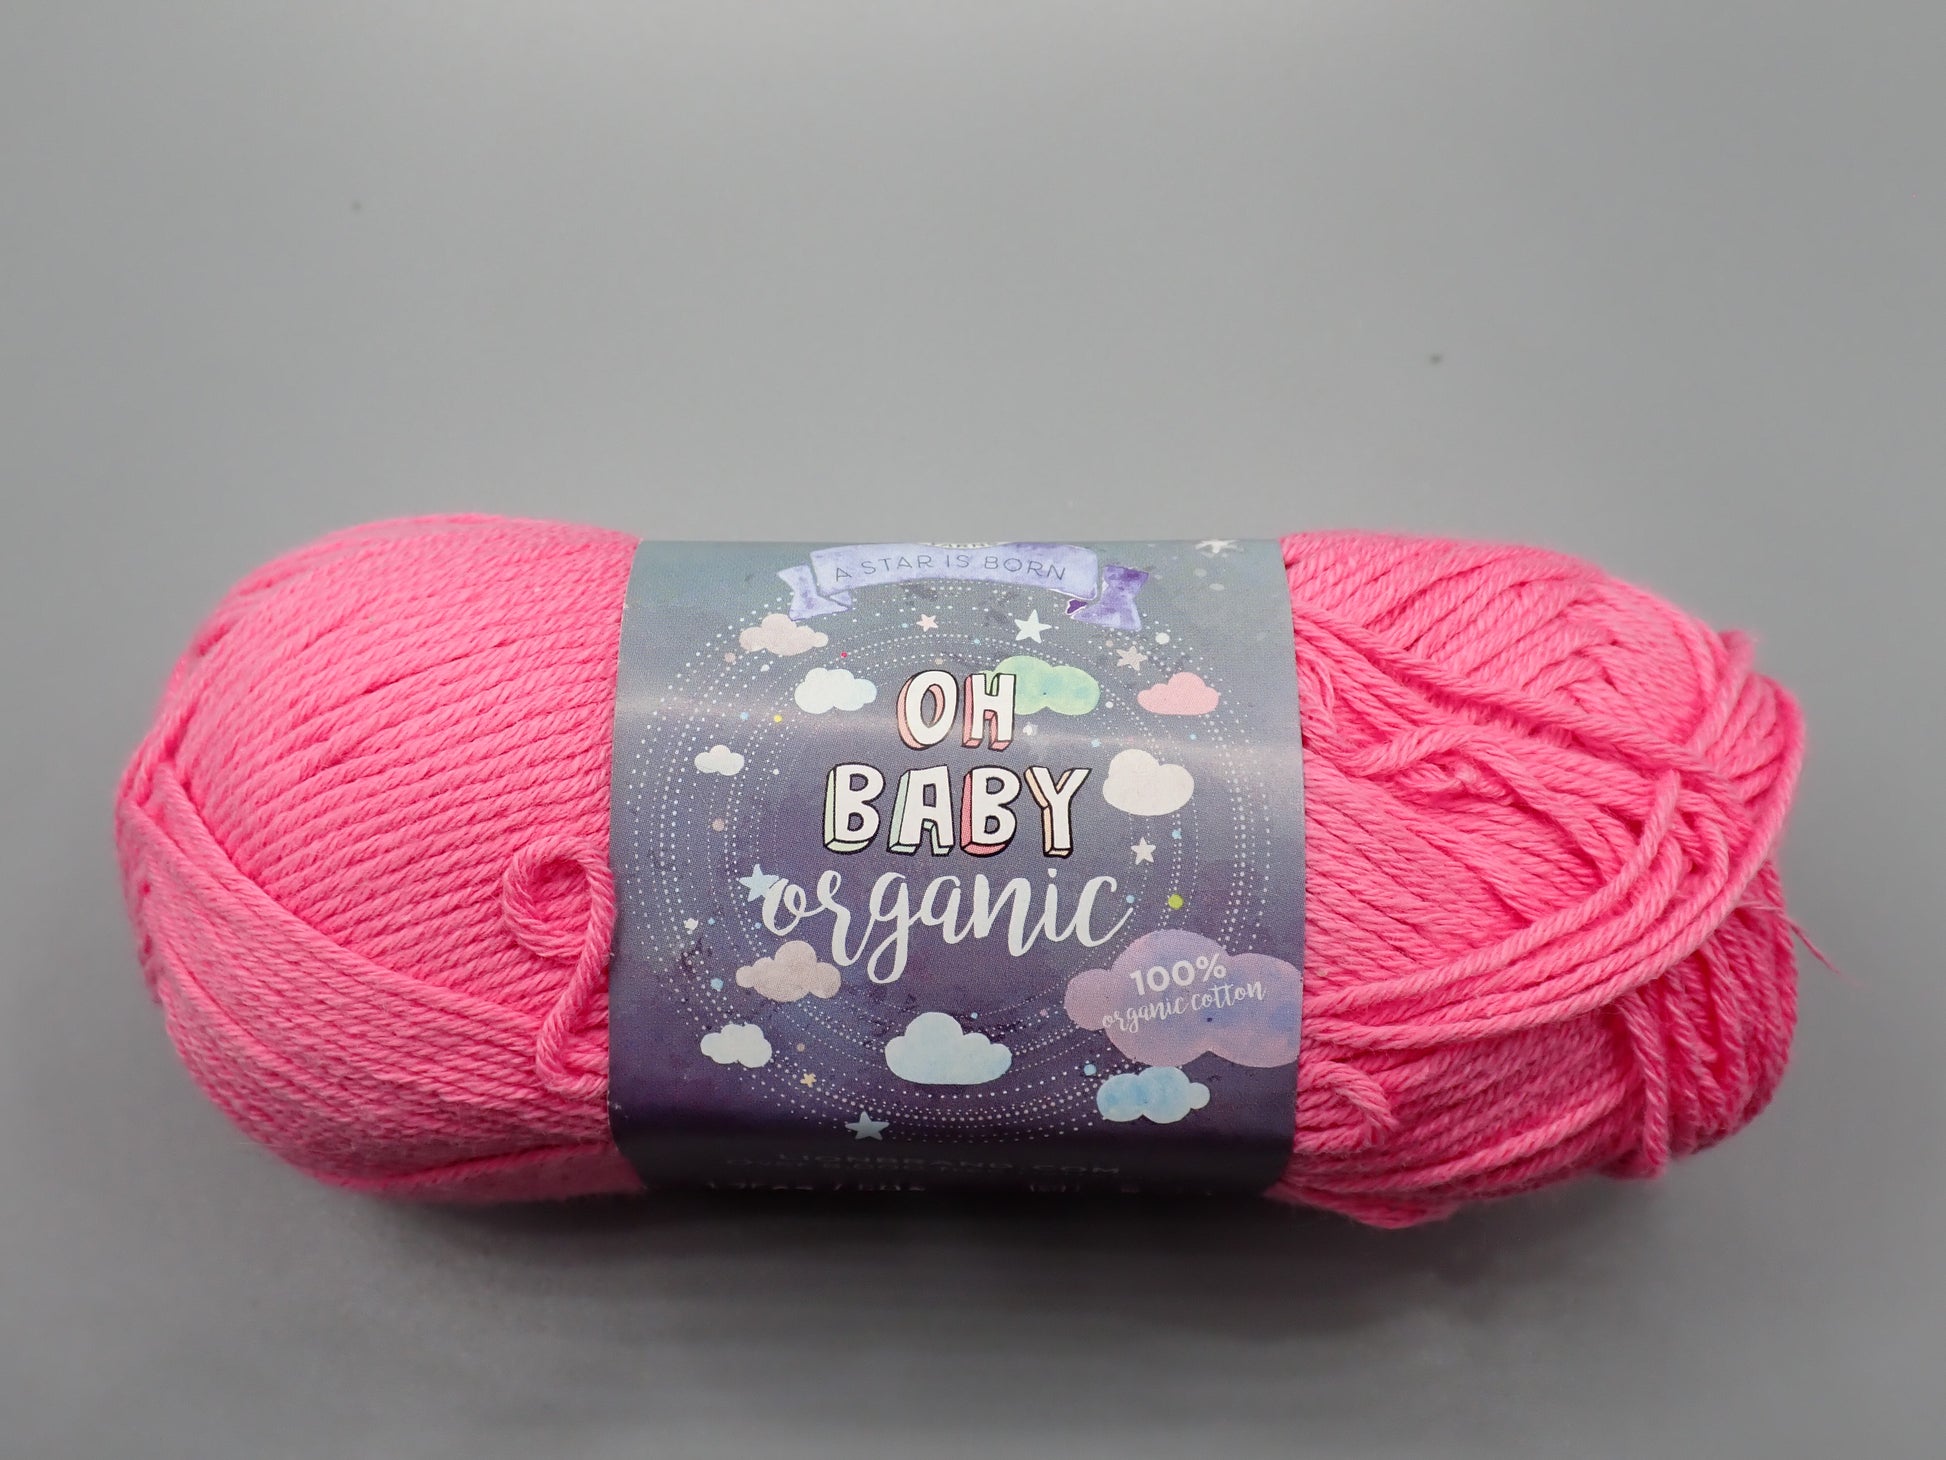 100% Organic Cotton Yarn from Lion Brand! - A Star is Born: Oh